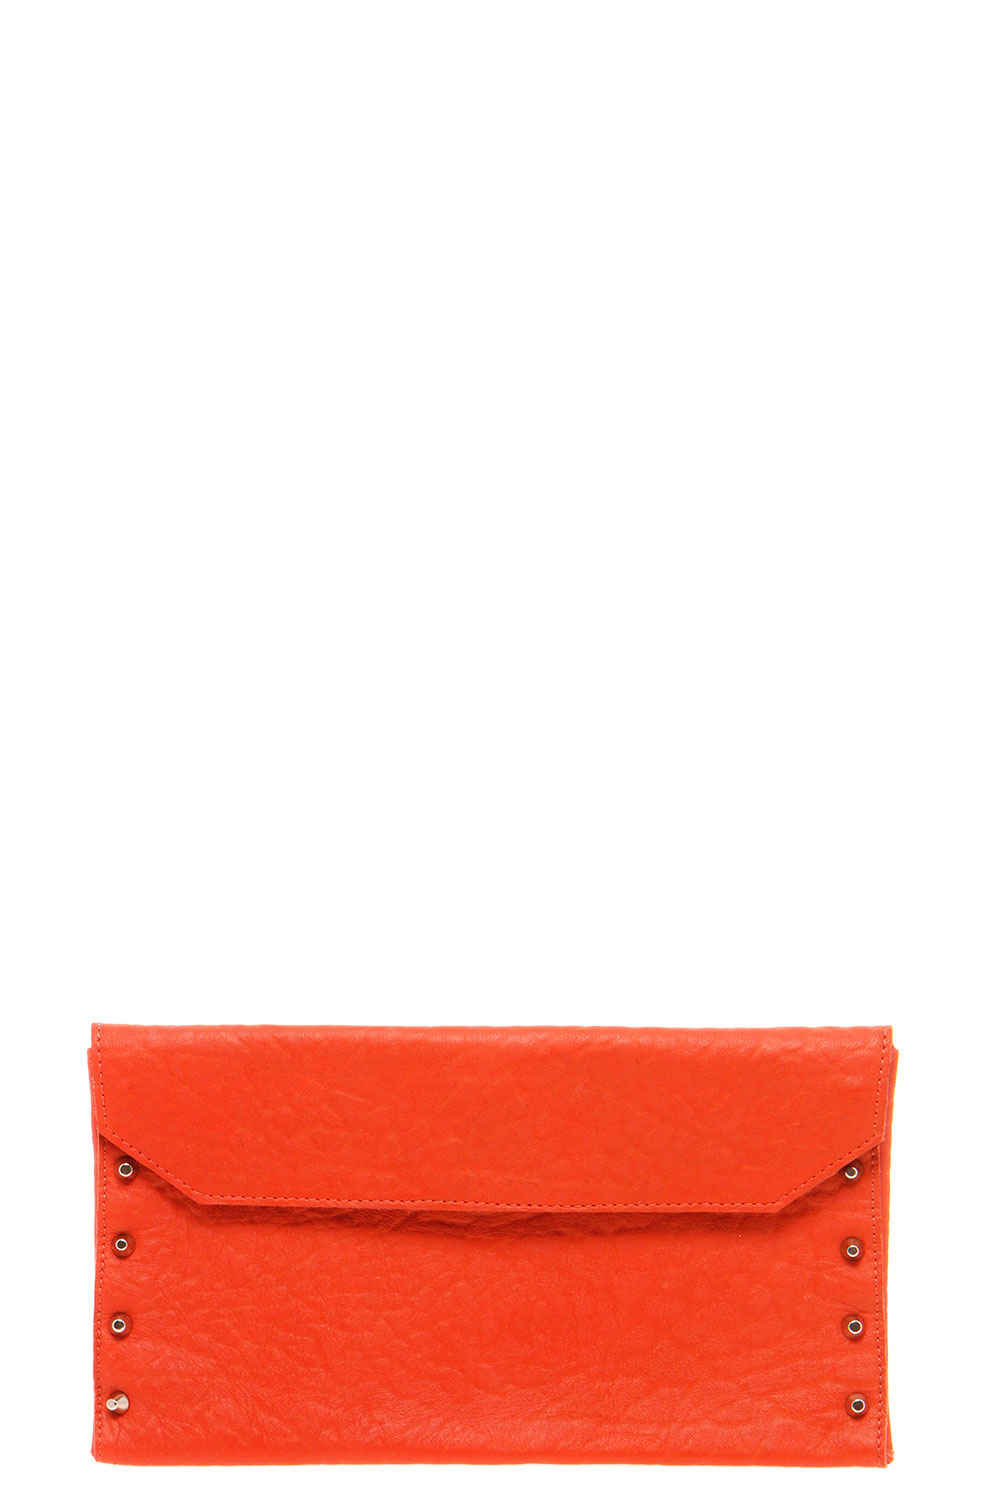 boohoo Boutique Tilly Leather Stud Clutch Bag -